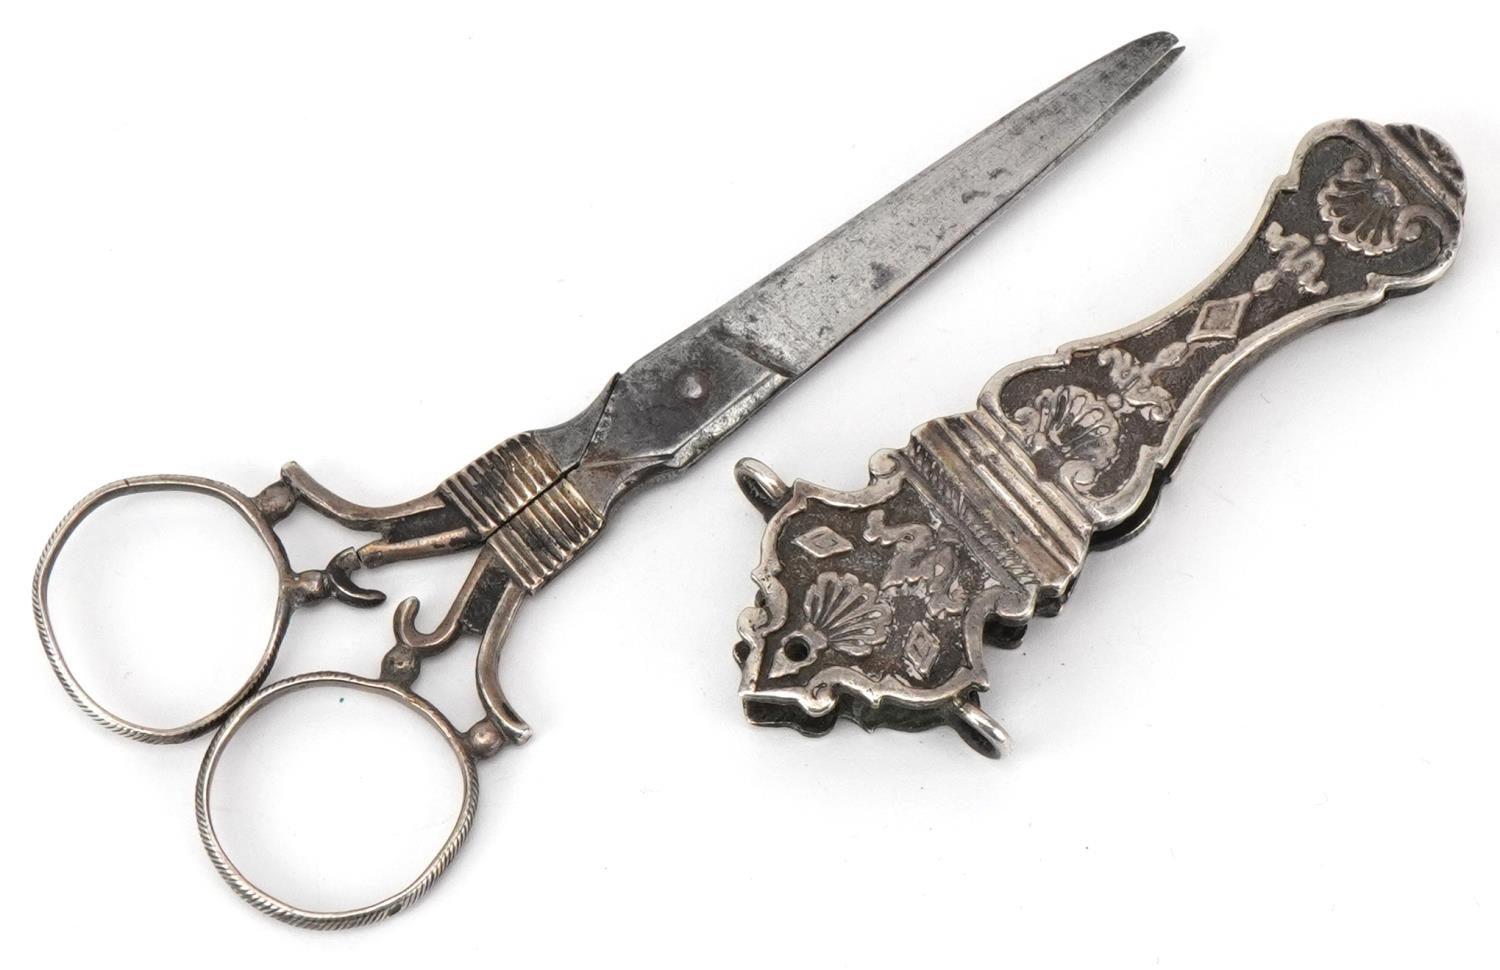 Pair of continental unmarked silver and steel chatelaine scissors with sheath, 11.5cm in length, - Image 2 of 3